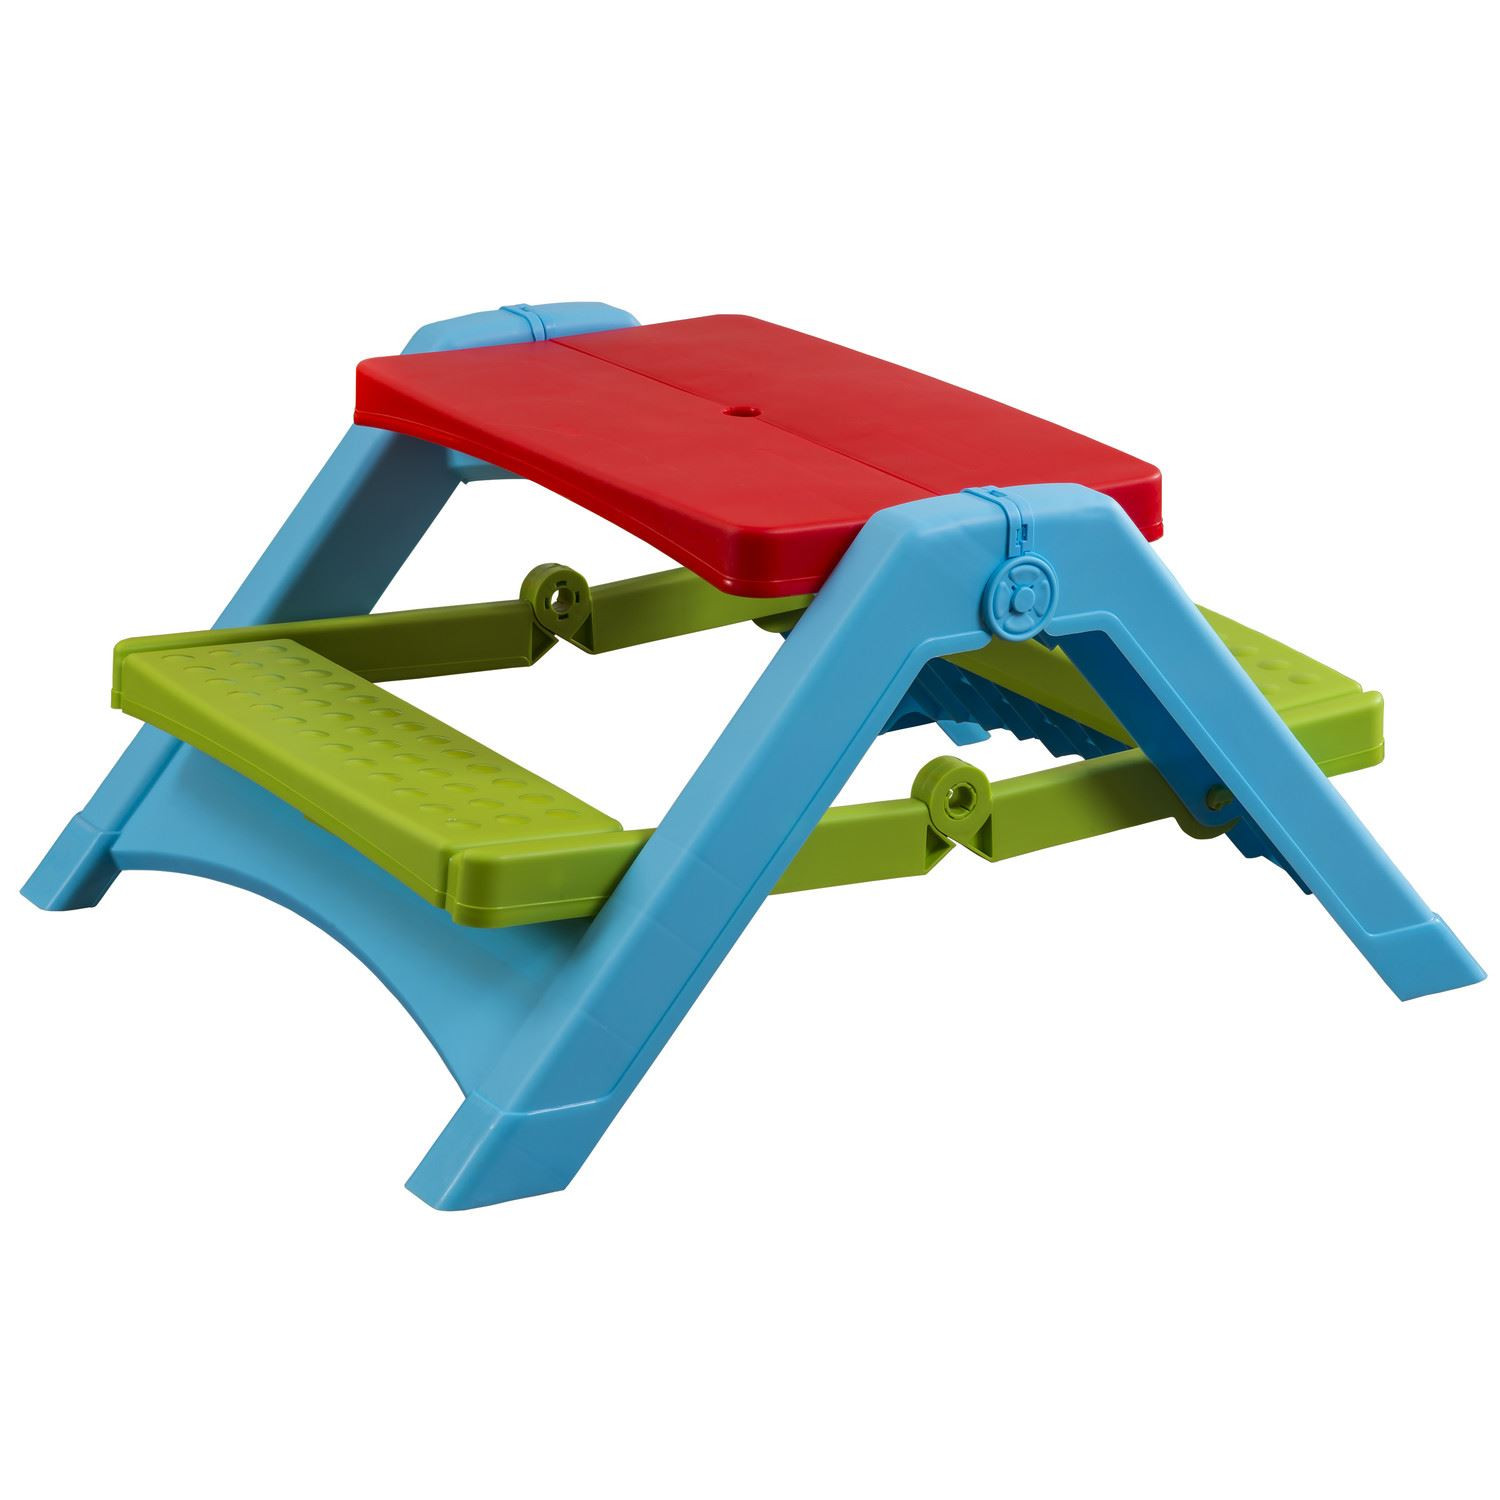 Kids Outdoor Table And Bench
 Kids PICNIC Camping Outdoor Bench Garden Furniture Indoor